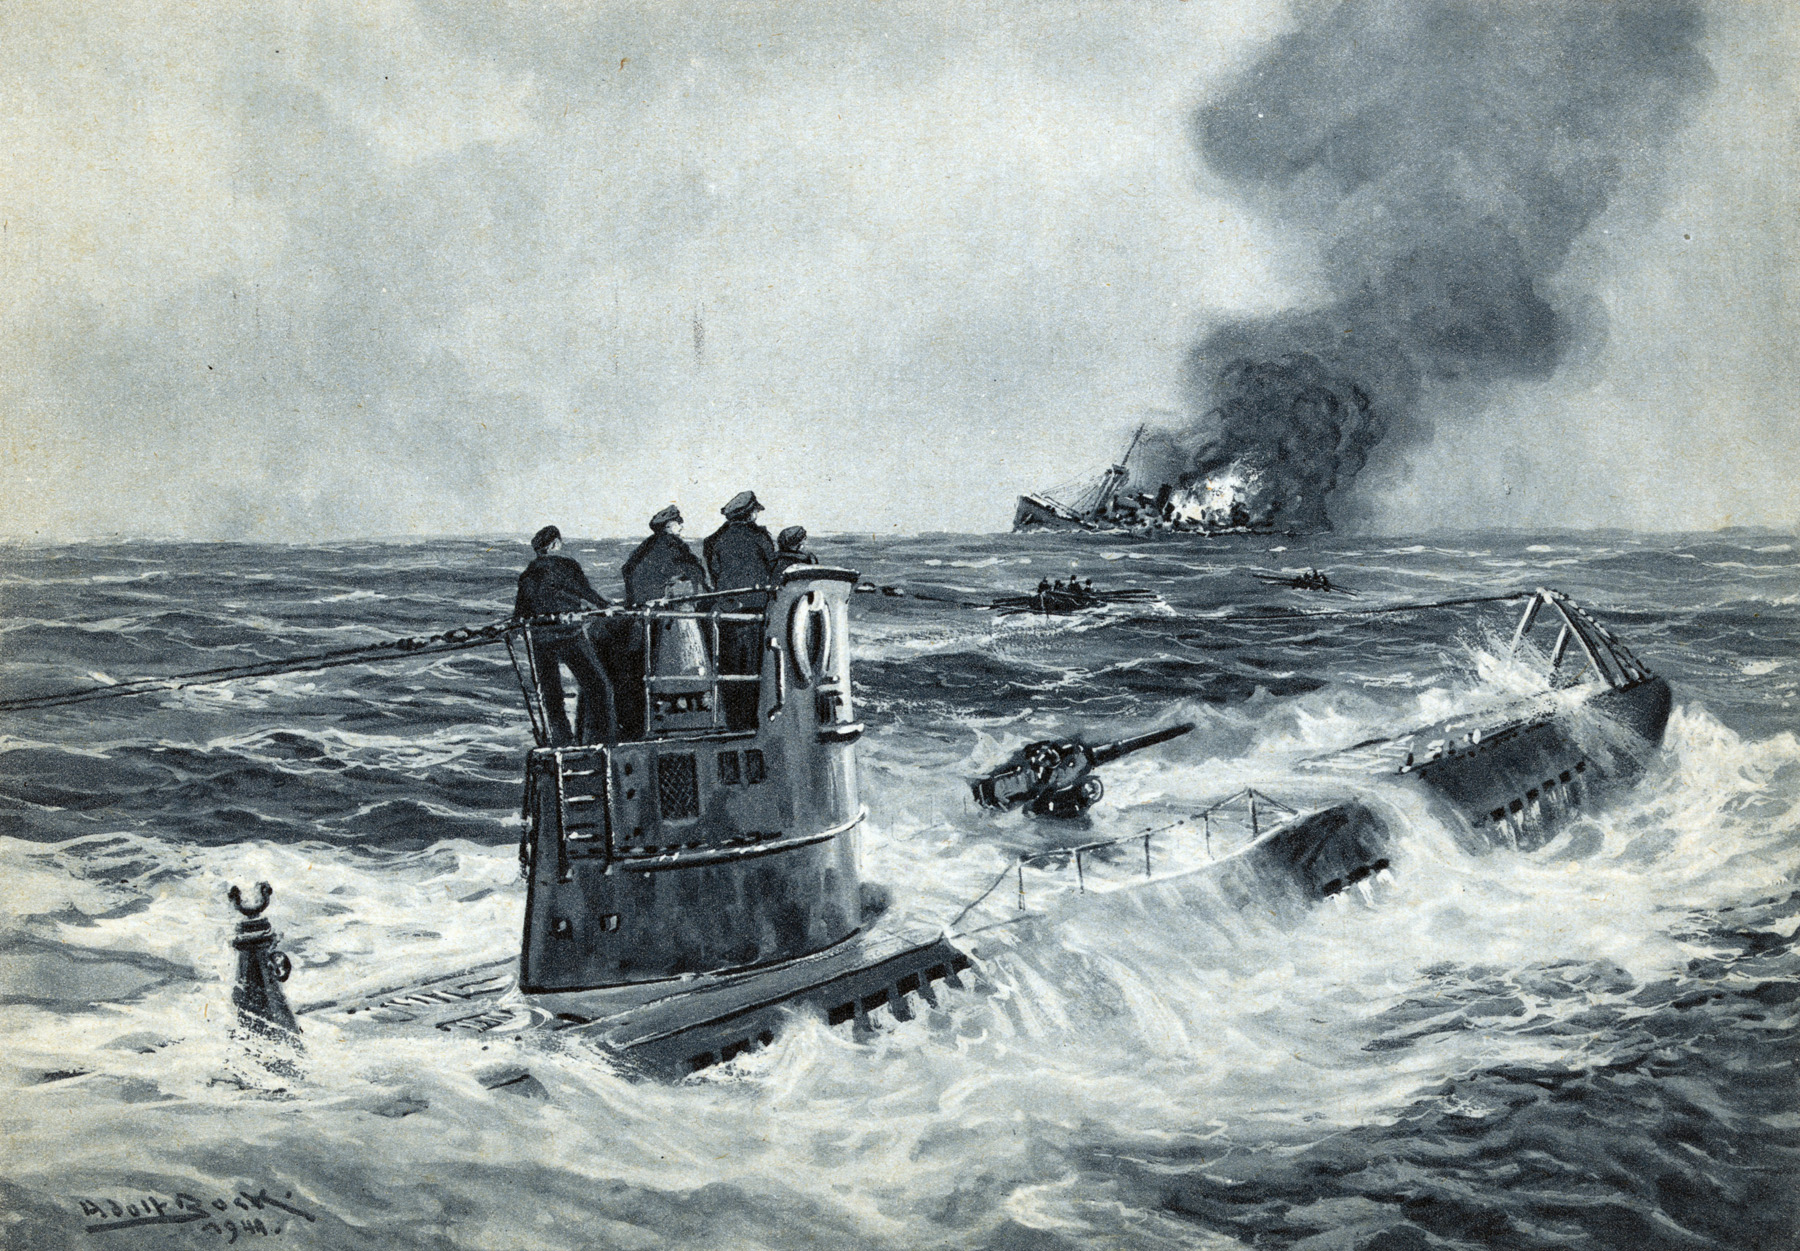 Crew members of a German U-boat watch as a British cargo steamer goes under in an Adolf Bock painting. U-boat captains relied heavily on their deck gun to attack smaller ships so that they could save their small number of torpedoes for tankers and other large ships. 